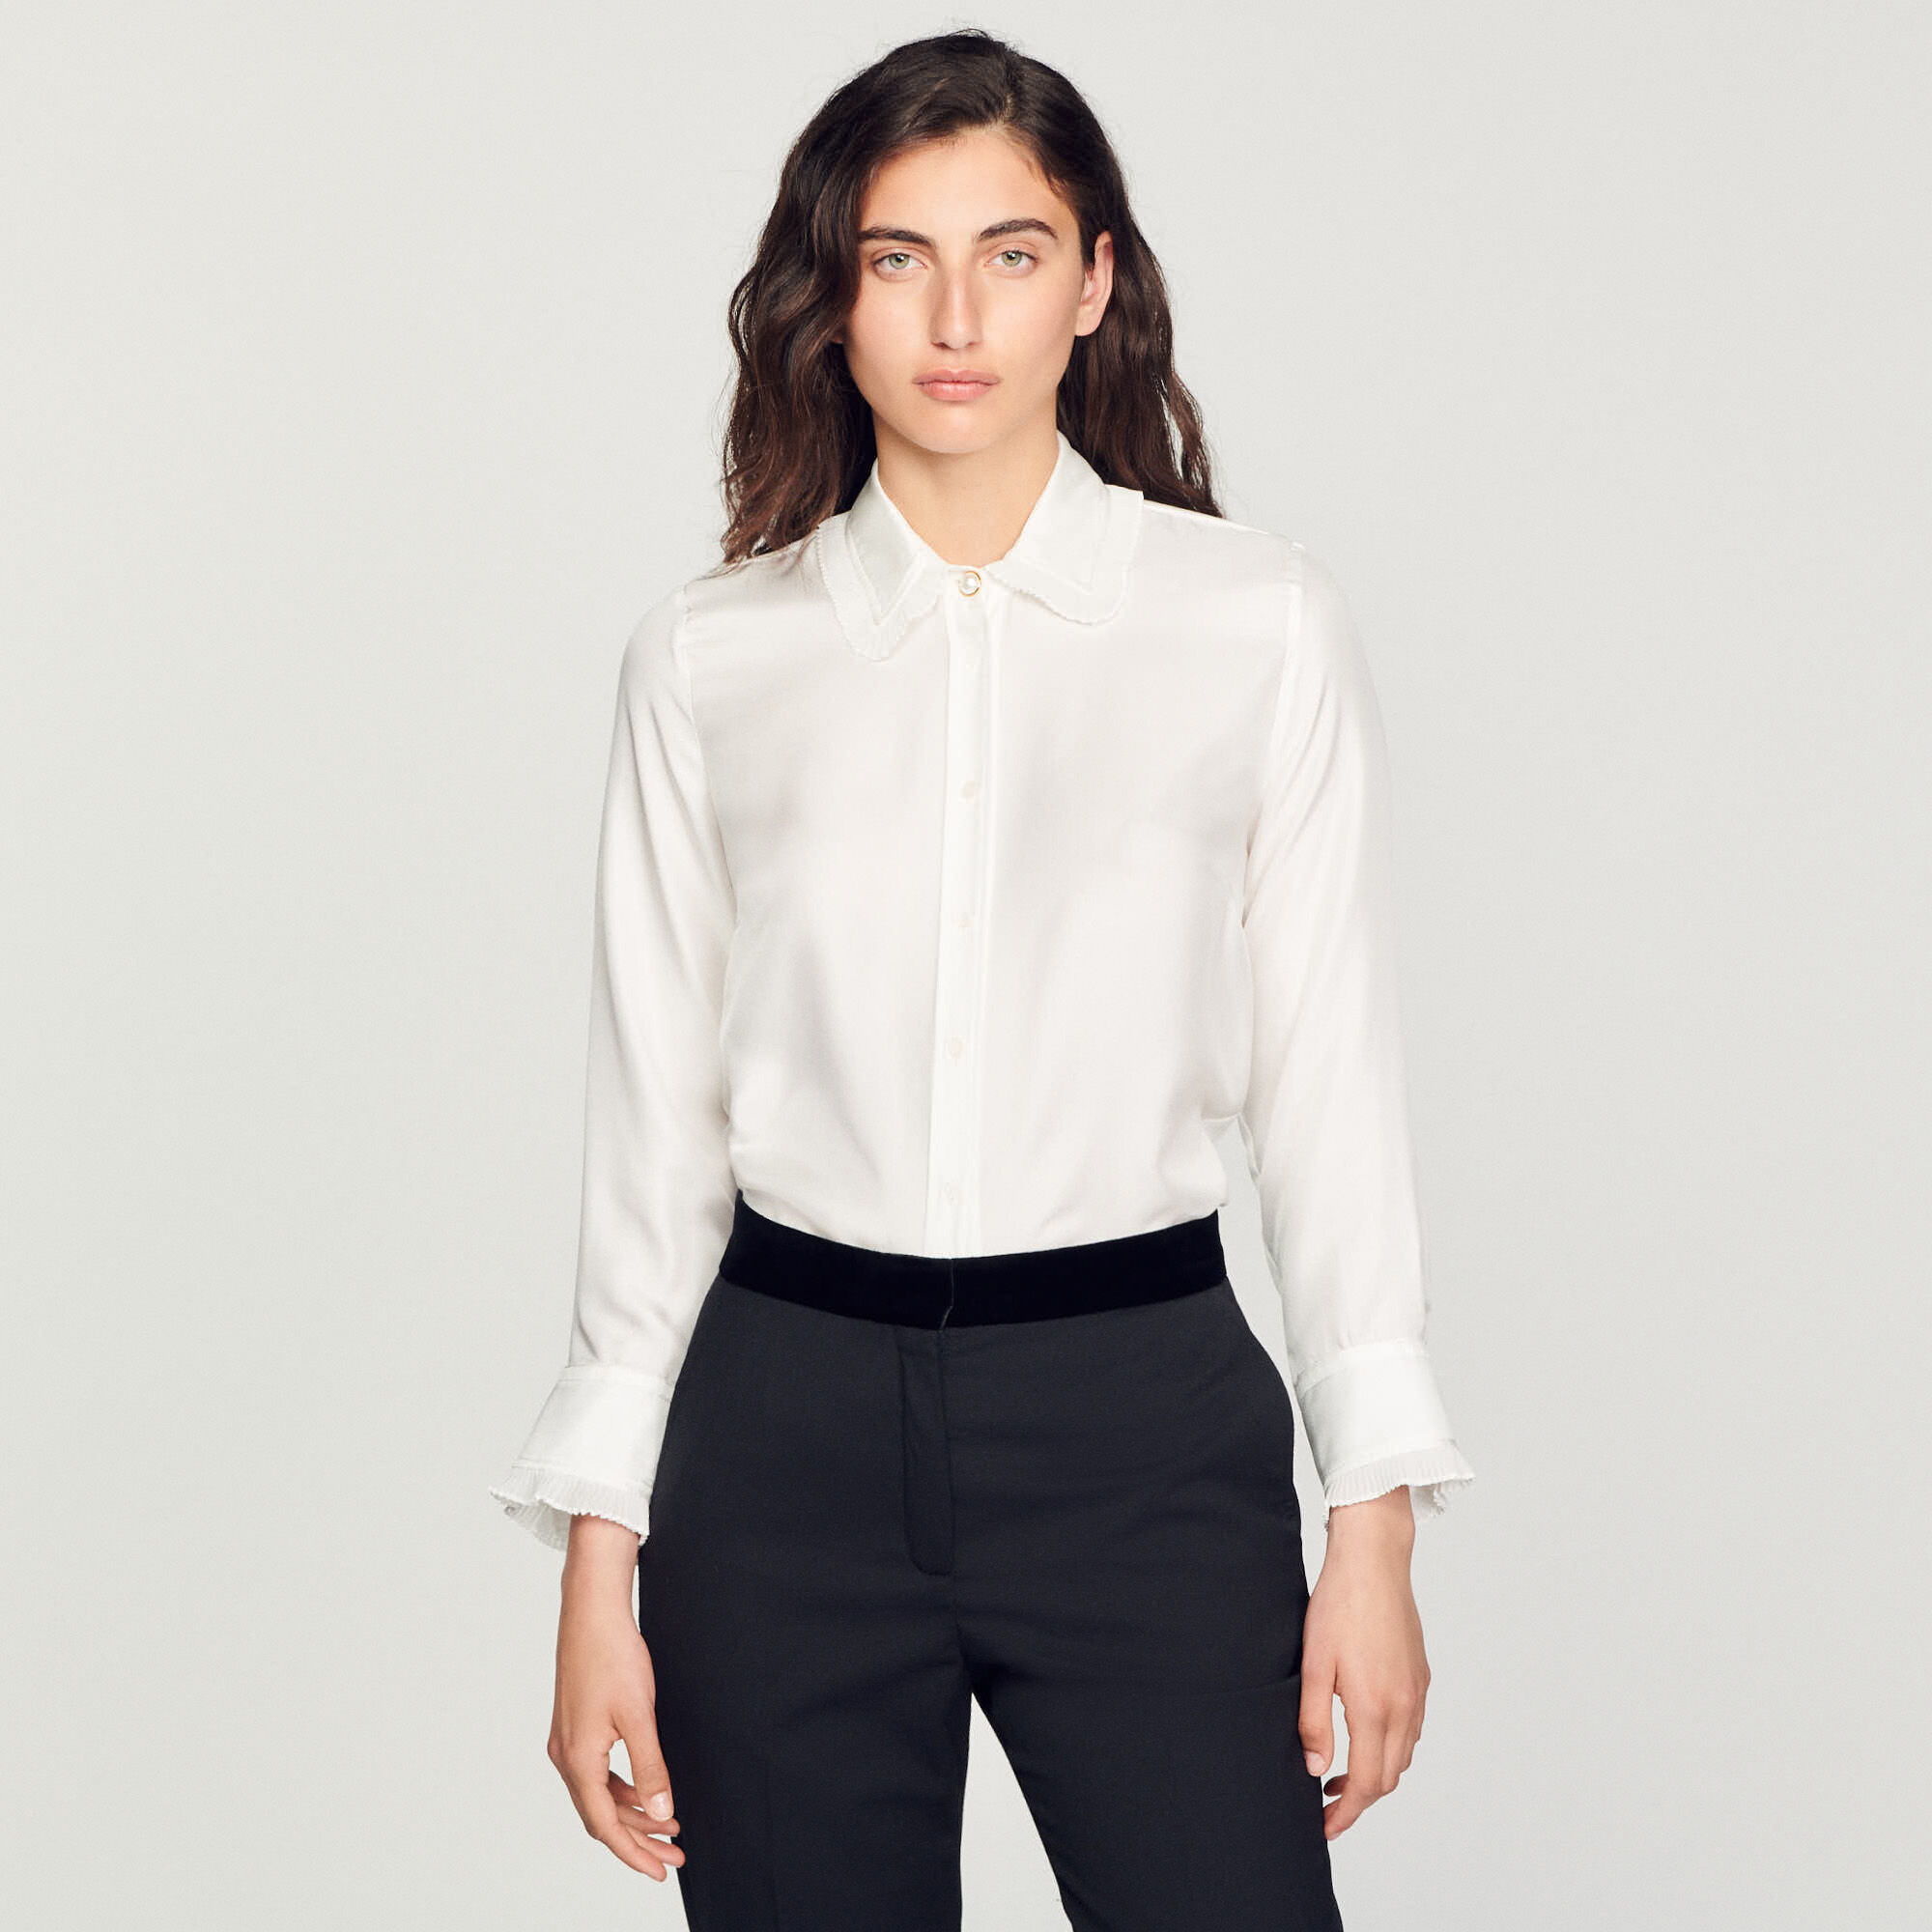 Silk shirt with pleated trim Select a size and Login to add to Wish list